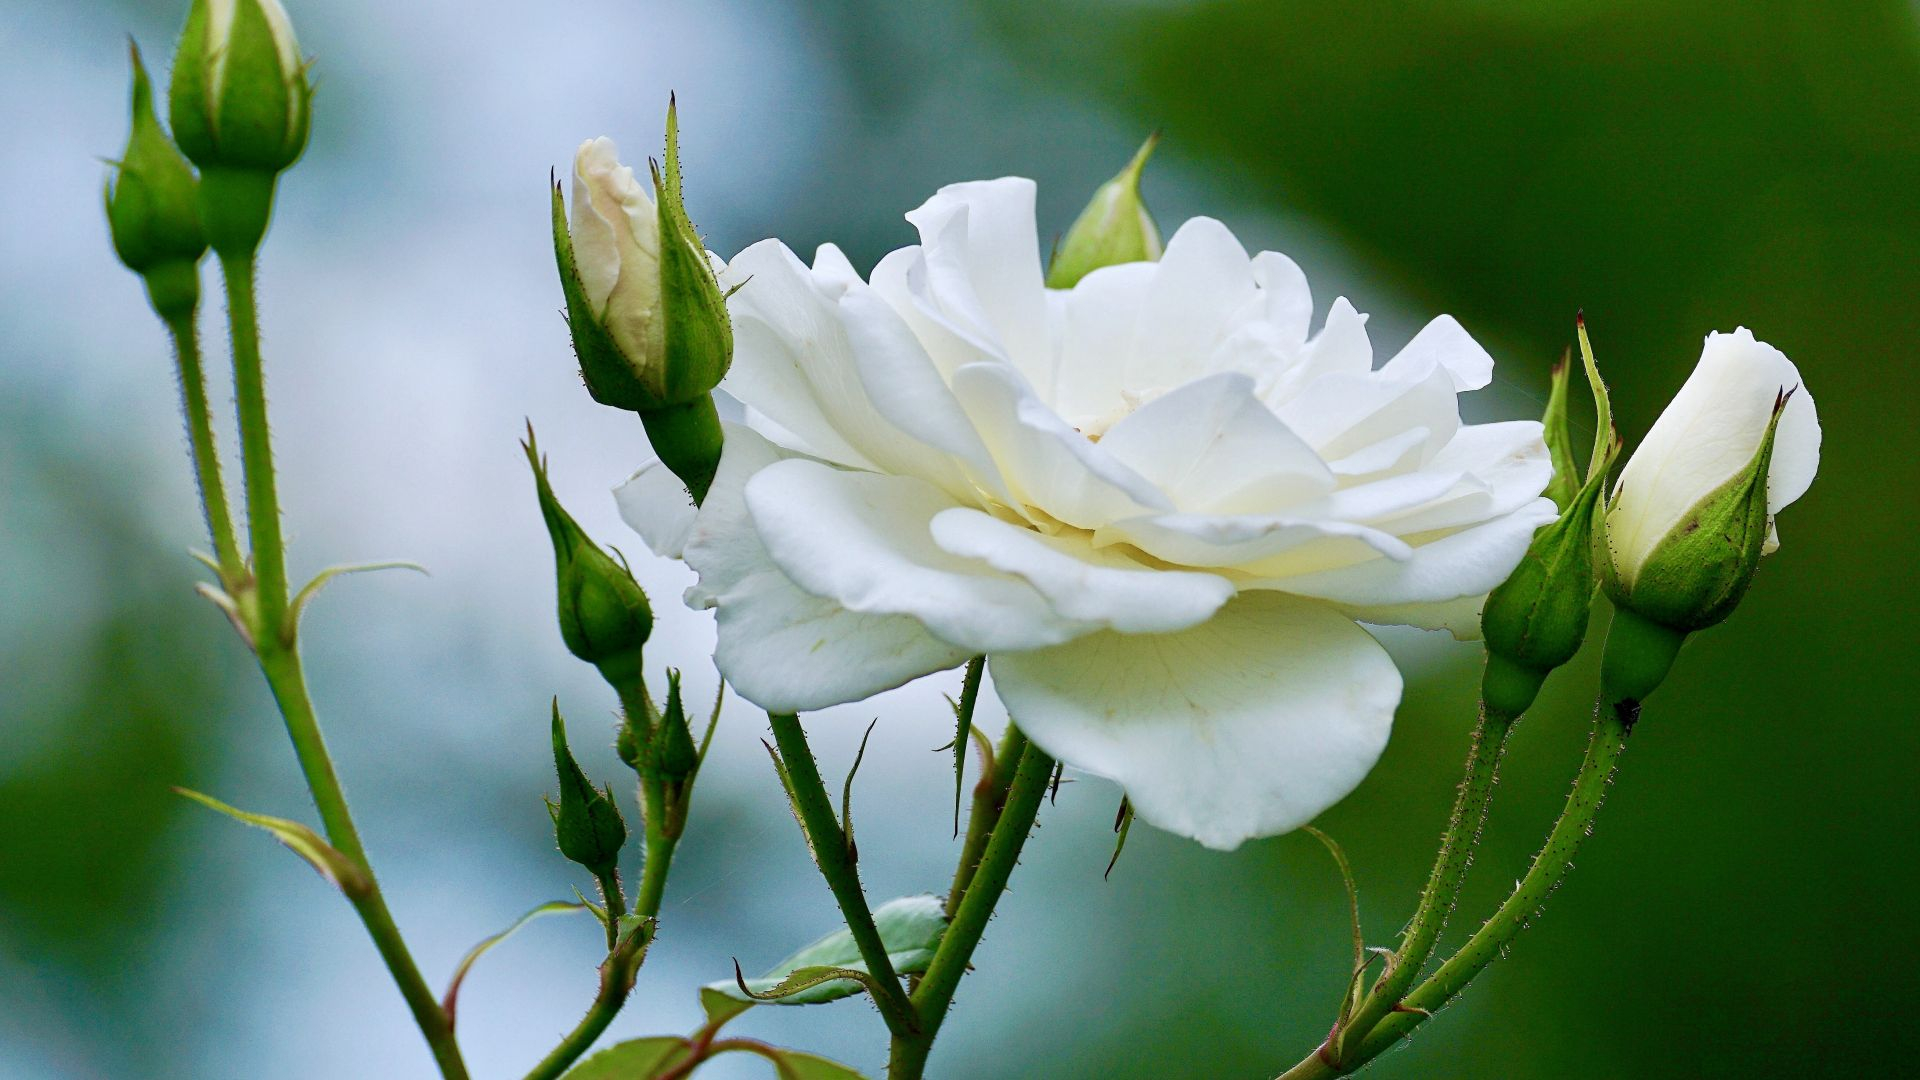 1920x1080 Desktop Wallpaper White Rose, Flower, Small Buds, Hd Image, Picture, Background, 7b0b47